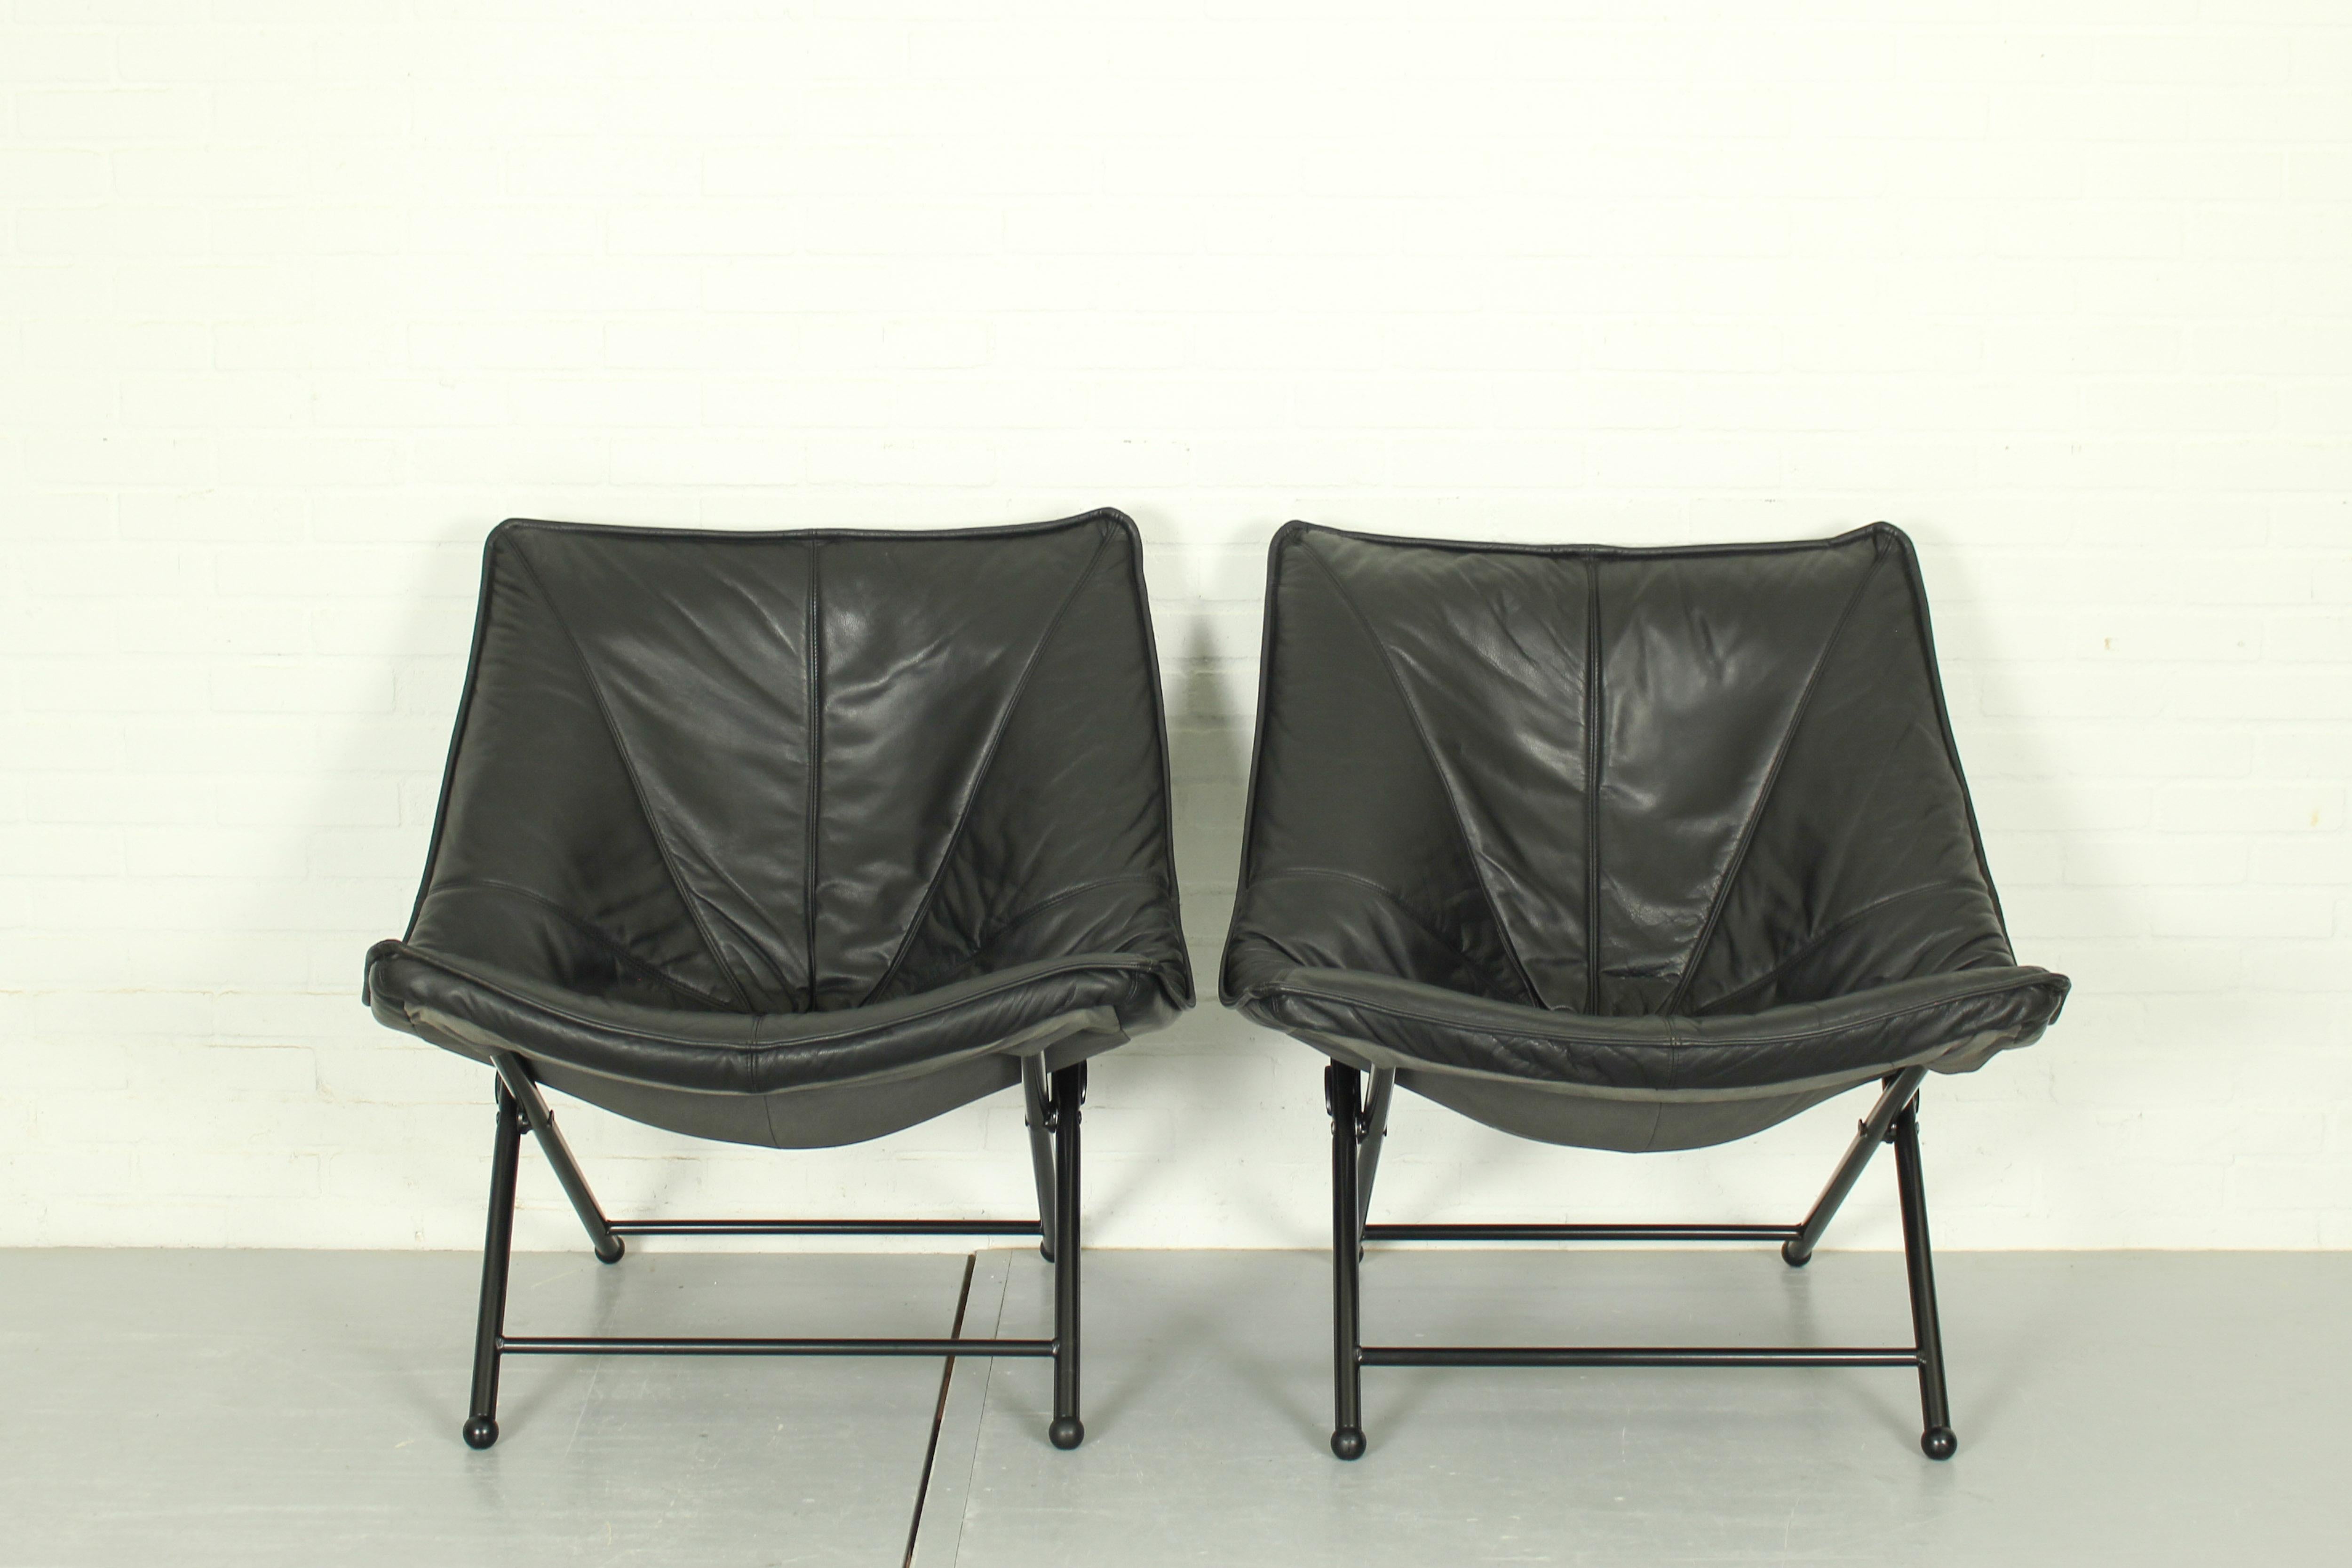 20th Century Folding Lounge Chairs in Black Leather by Teun Van Zanten for Molinari, 1970s For Sale